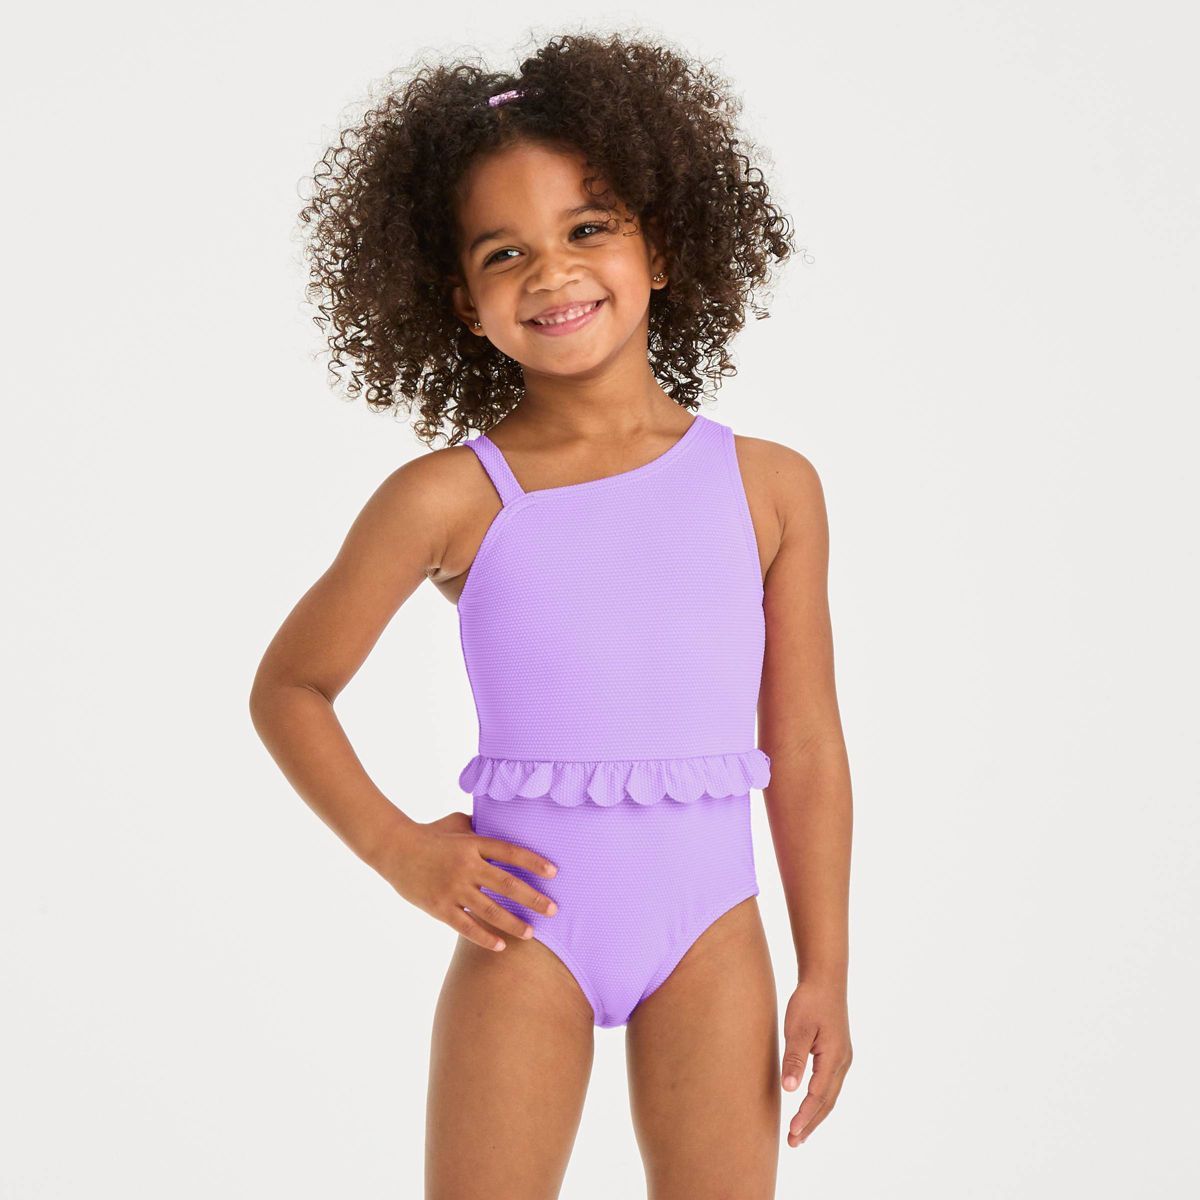 TargetClothing, Shoes & AccessoriesToddler ClothingToddler Girls’ ClothingSwimsuitsShop all Cat... | Target